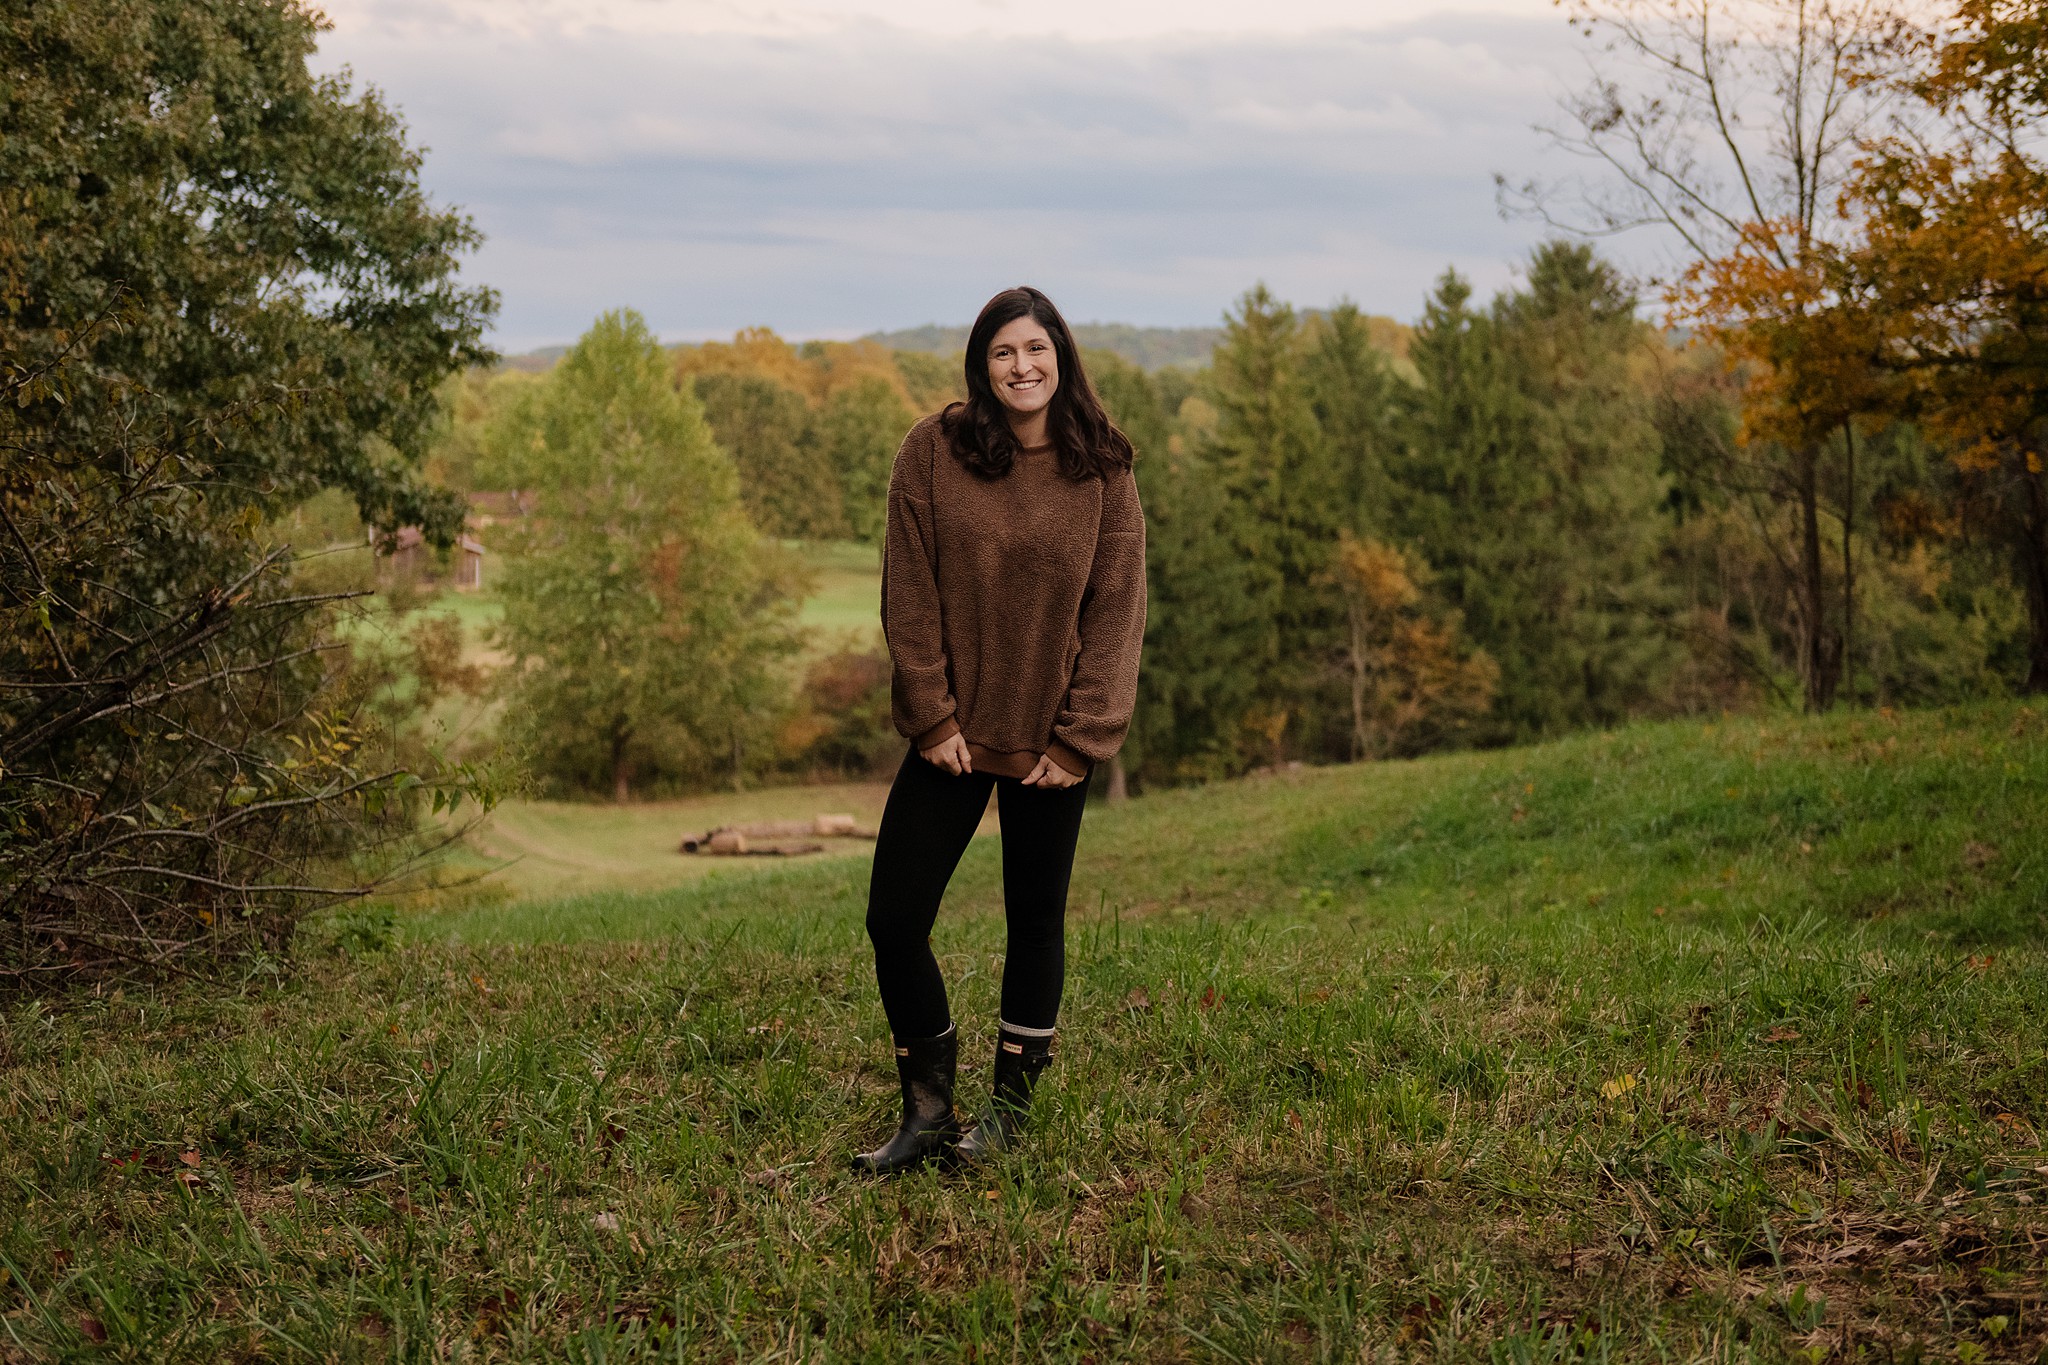 A woman in a brown sweater, smiling sweetly, stands in a field with beautiful scenery in the background.